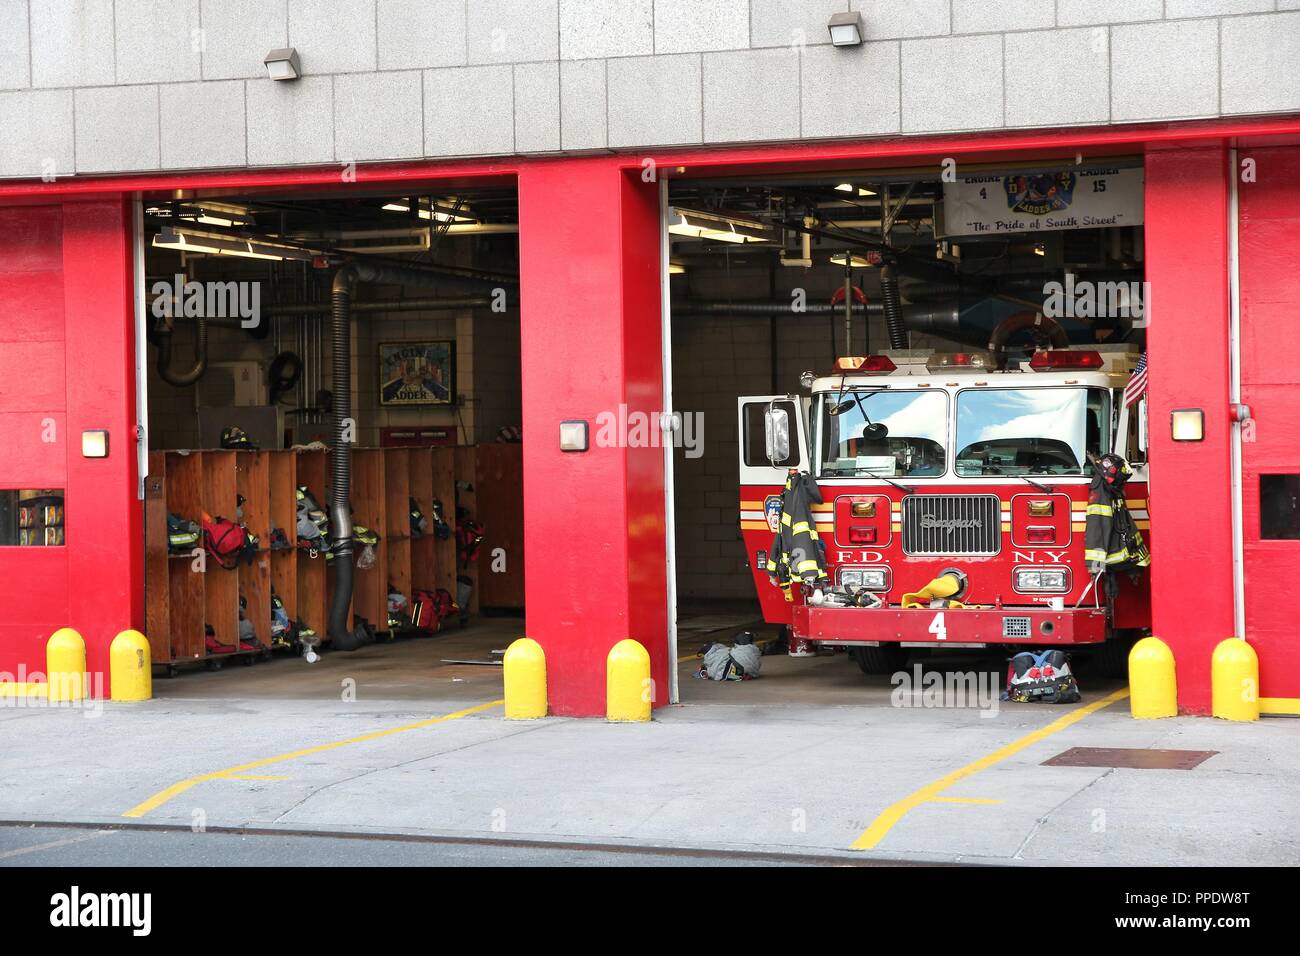 NEW YORK, USA - JULY 4, 2013: Exterior view of New York City Fire Department. FDNY is the largest fire department in the USA with 15,870 employees and Stock Photo